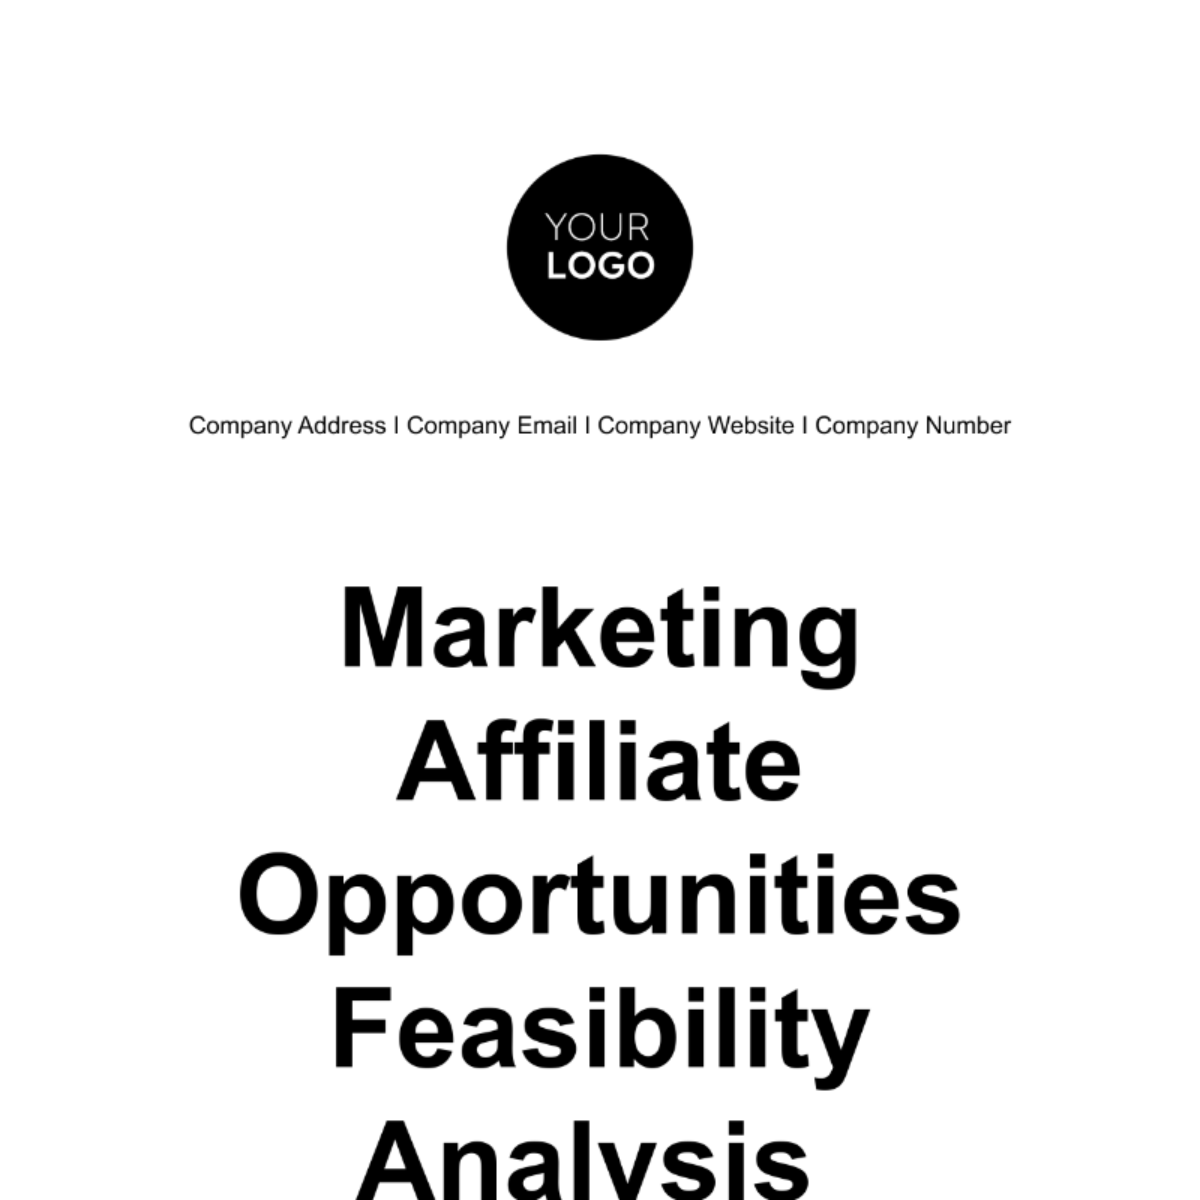 Free Marketing Affiliate Opportunities Feasibility Analysis Template